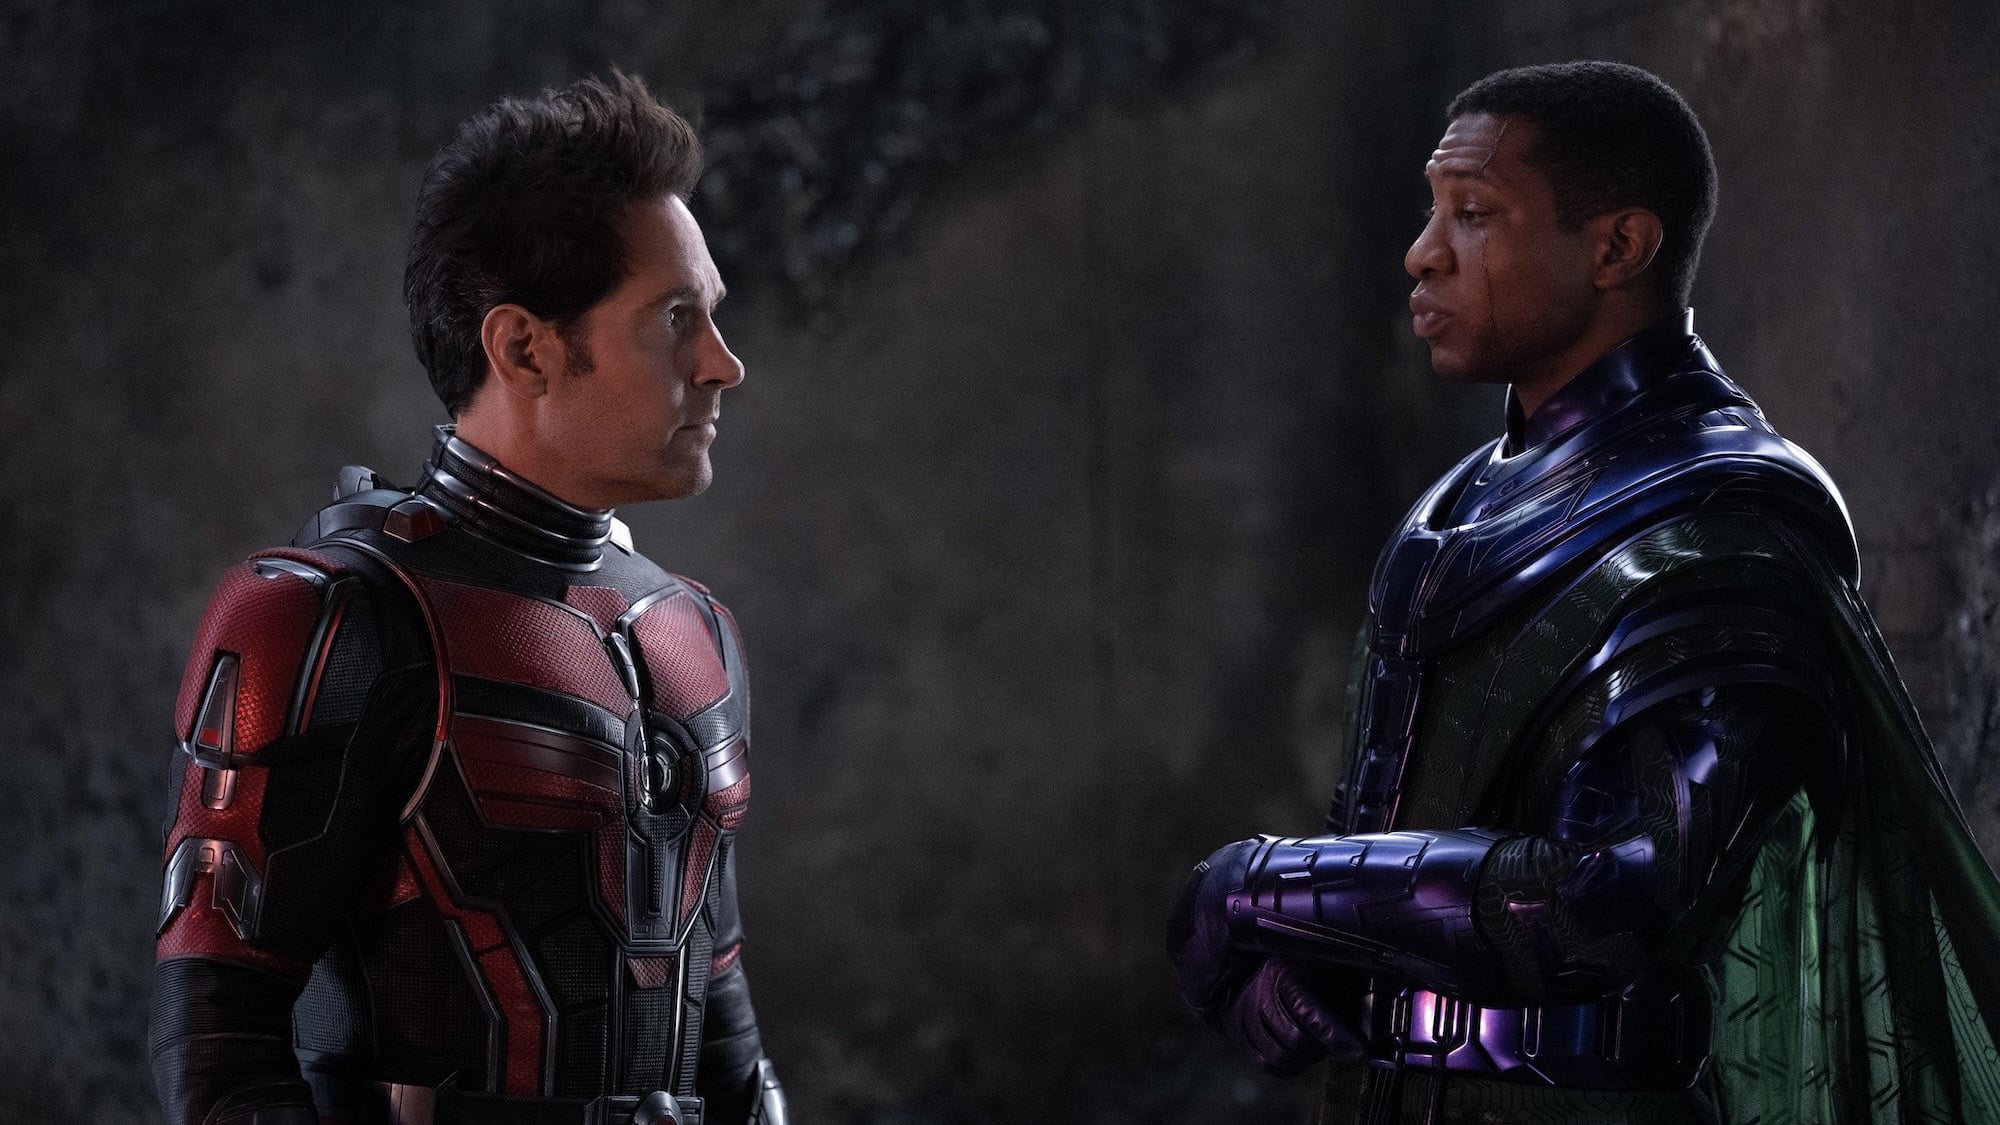 Ant-Man (Paul Rudd) stands facing Kang the Conqueror (Jonathan Majors) in a still from the latest MCU film entry.